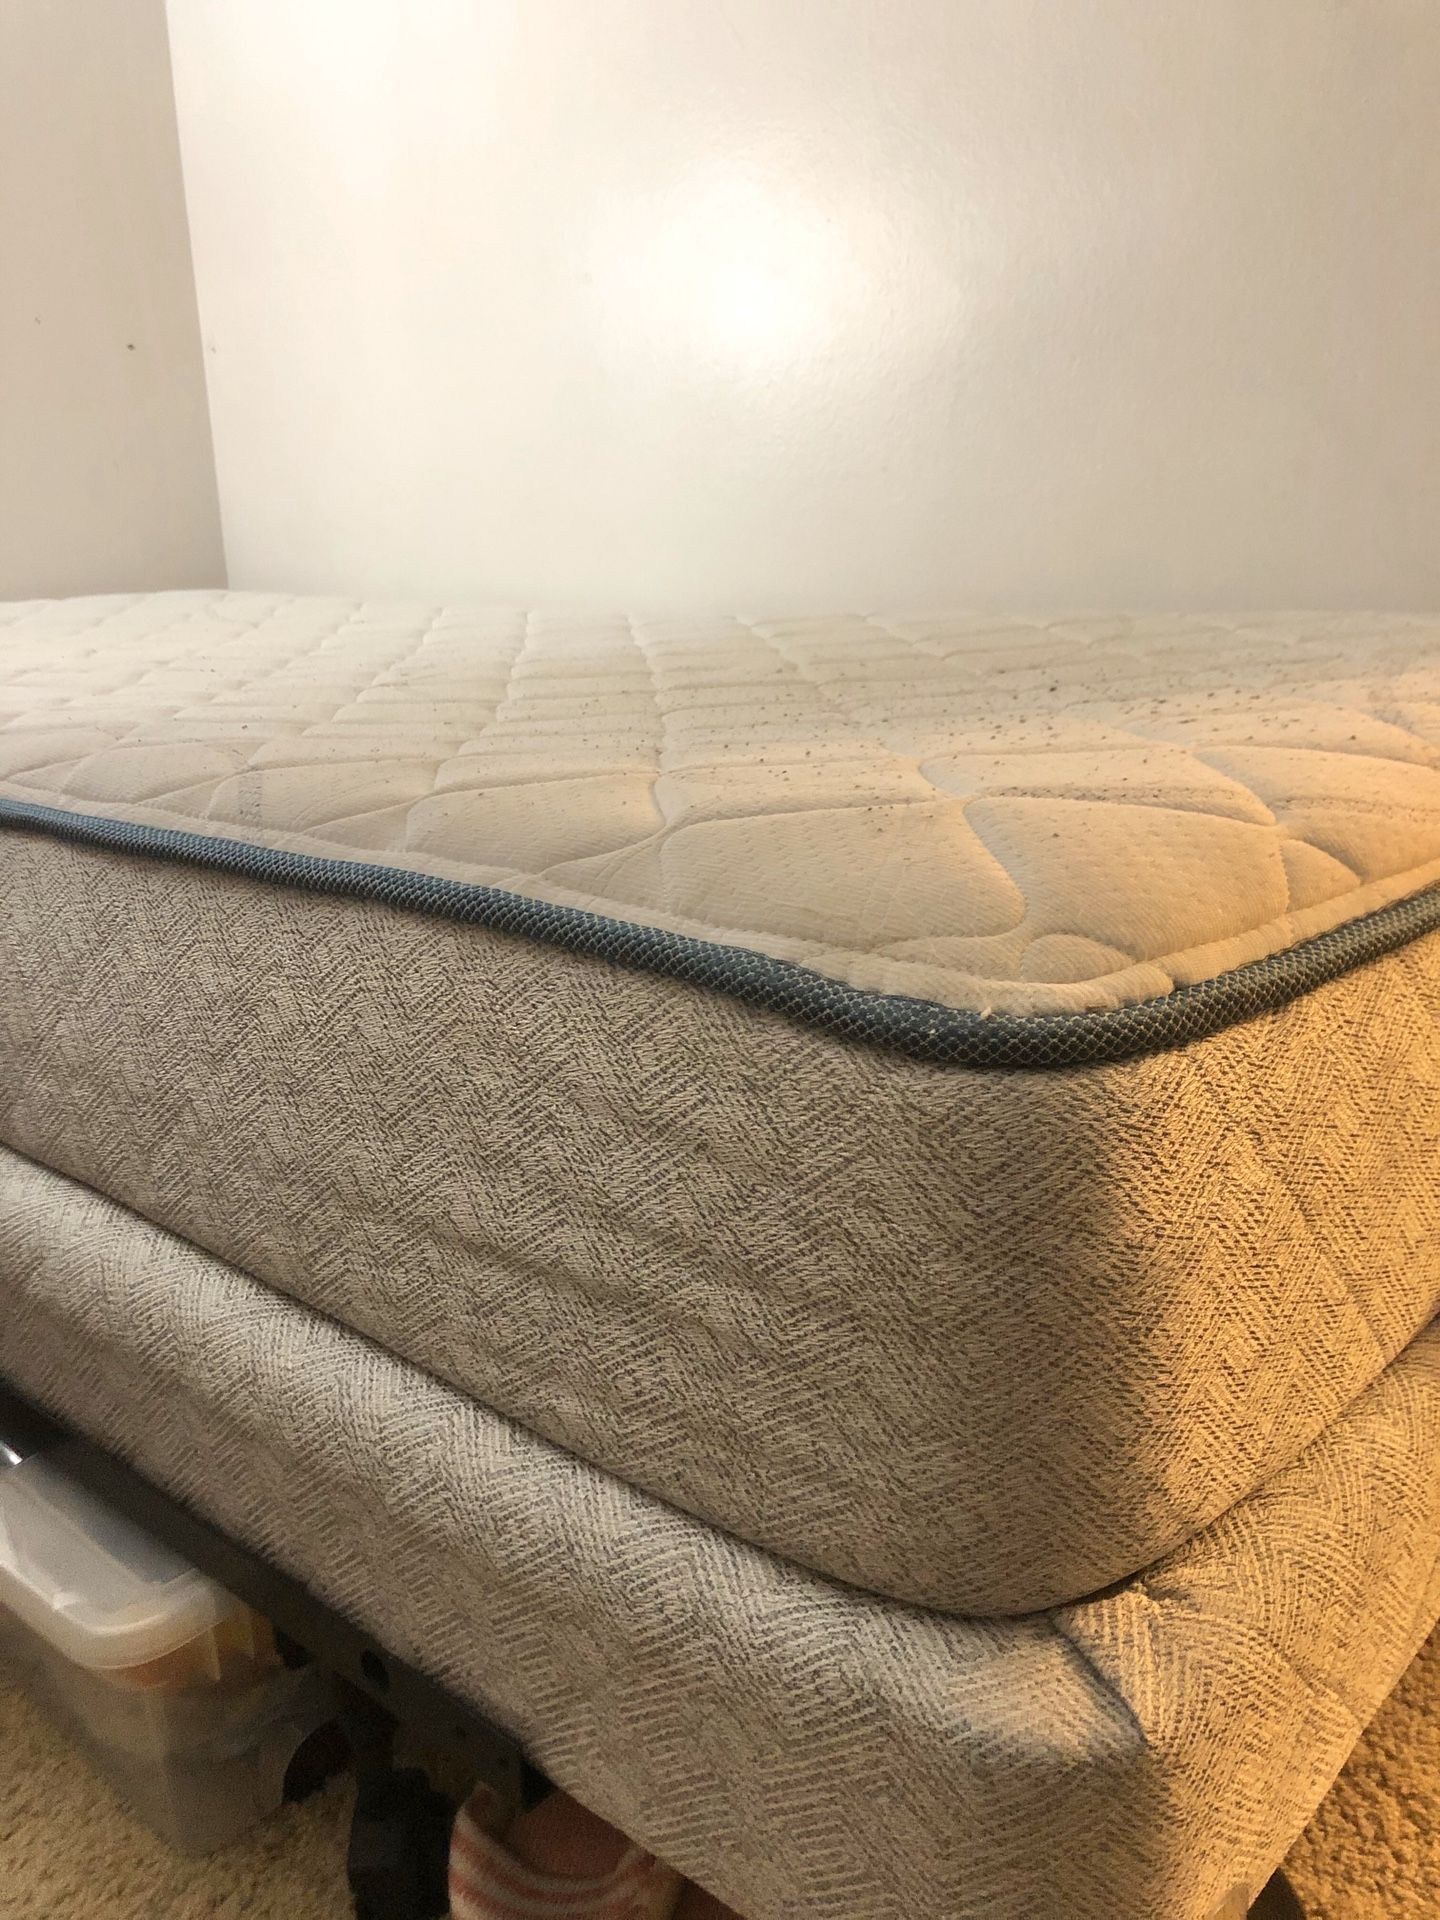 Extra long twin bed (gray color)